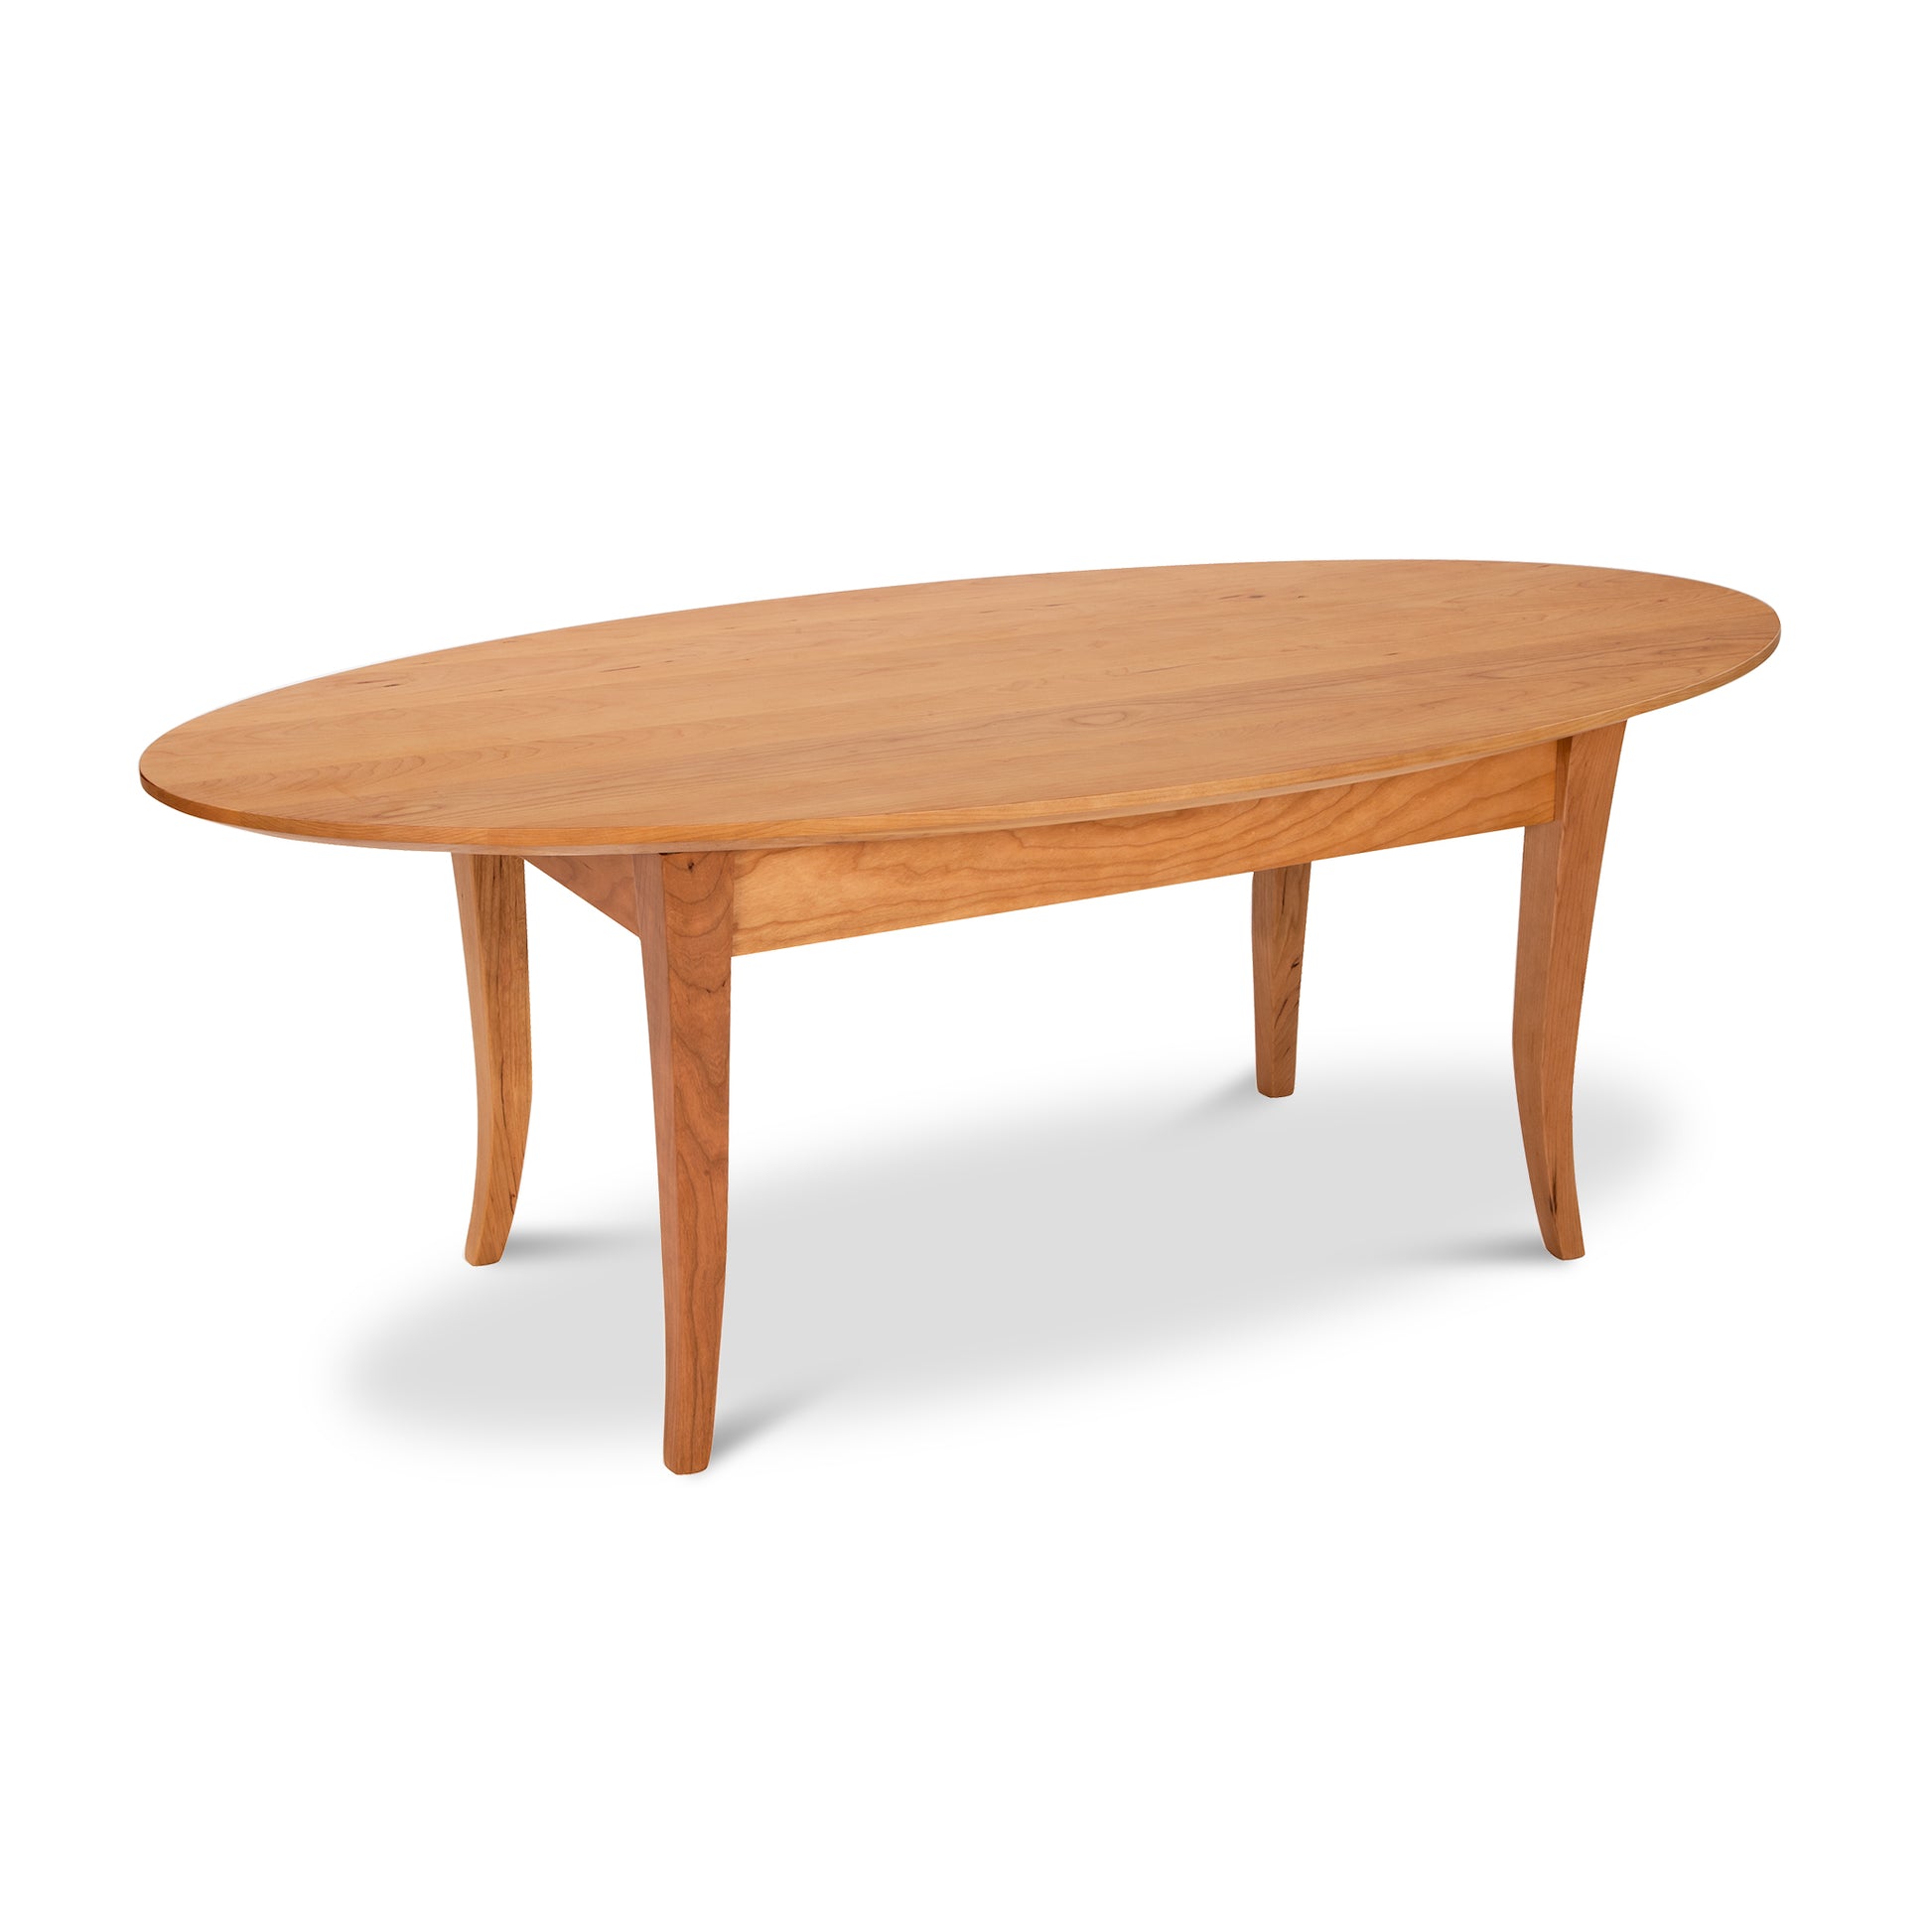 A Classic Shaker Flare Leg Oval Top Coffee Table by Lyndon Furniture on a white background.